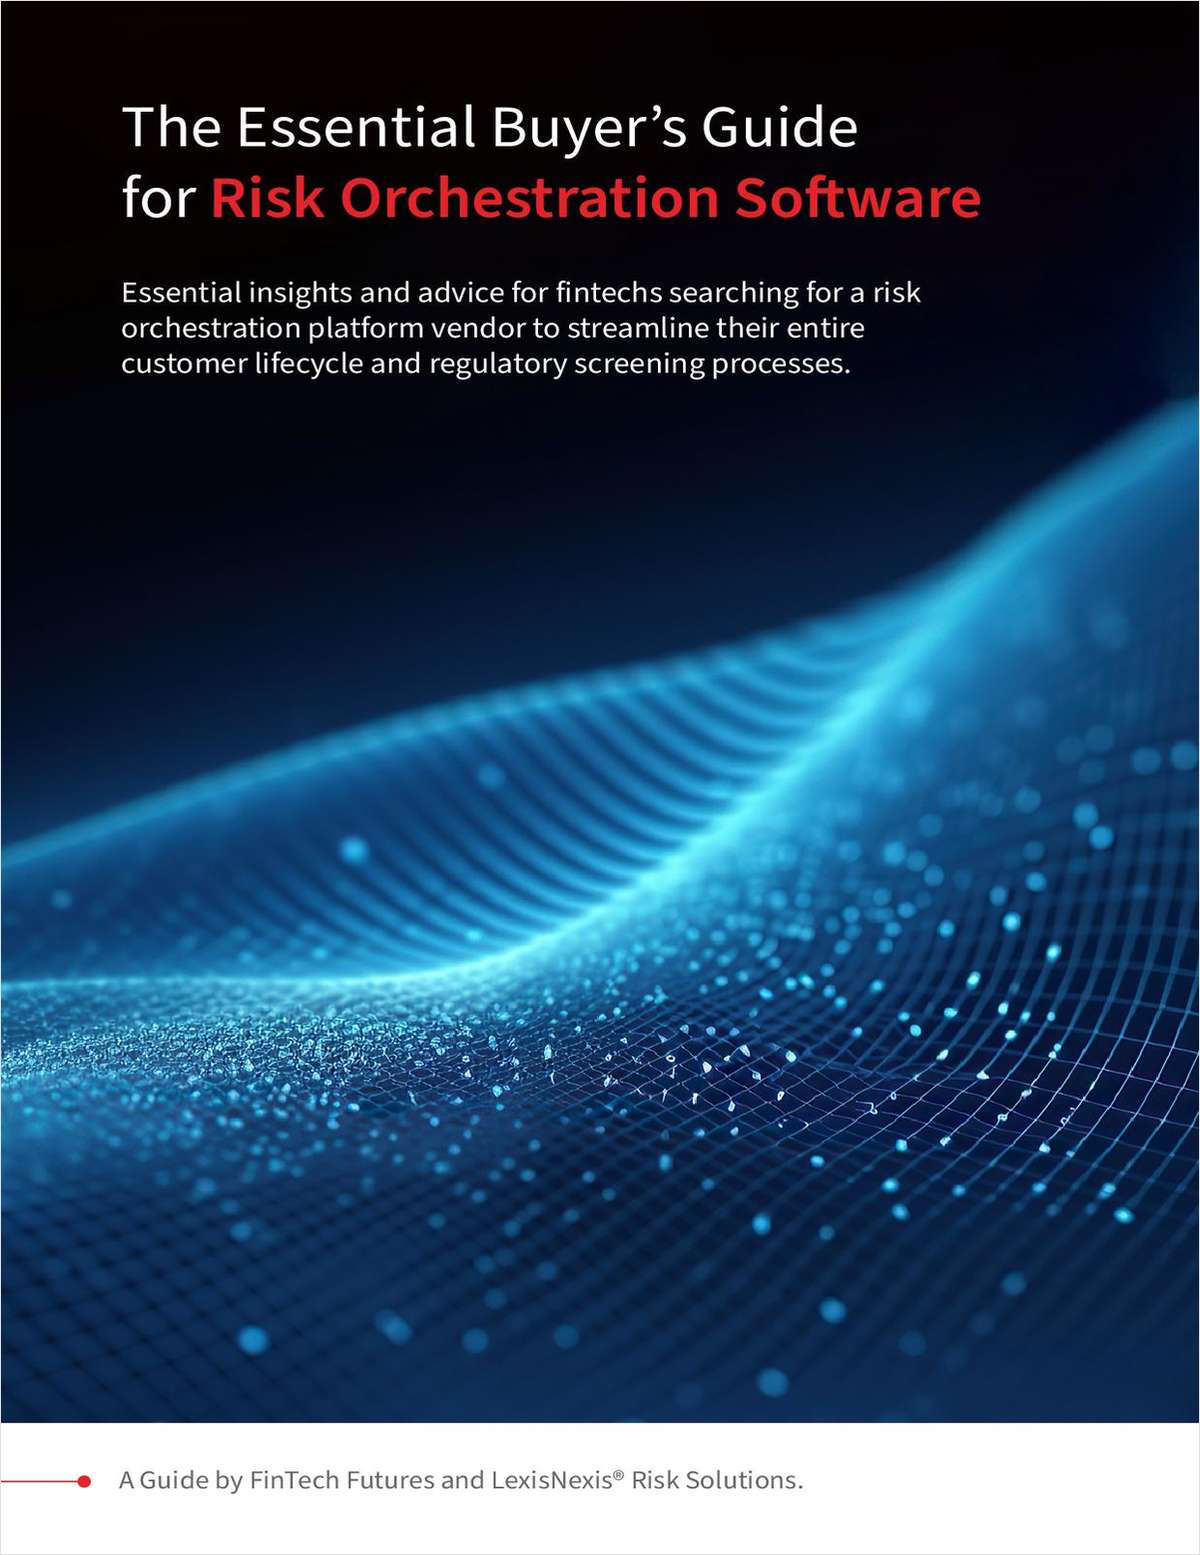 The essential buyer's guide for risk orchestration software